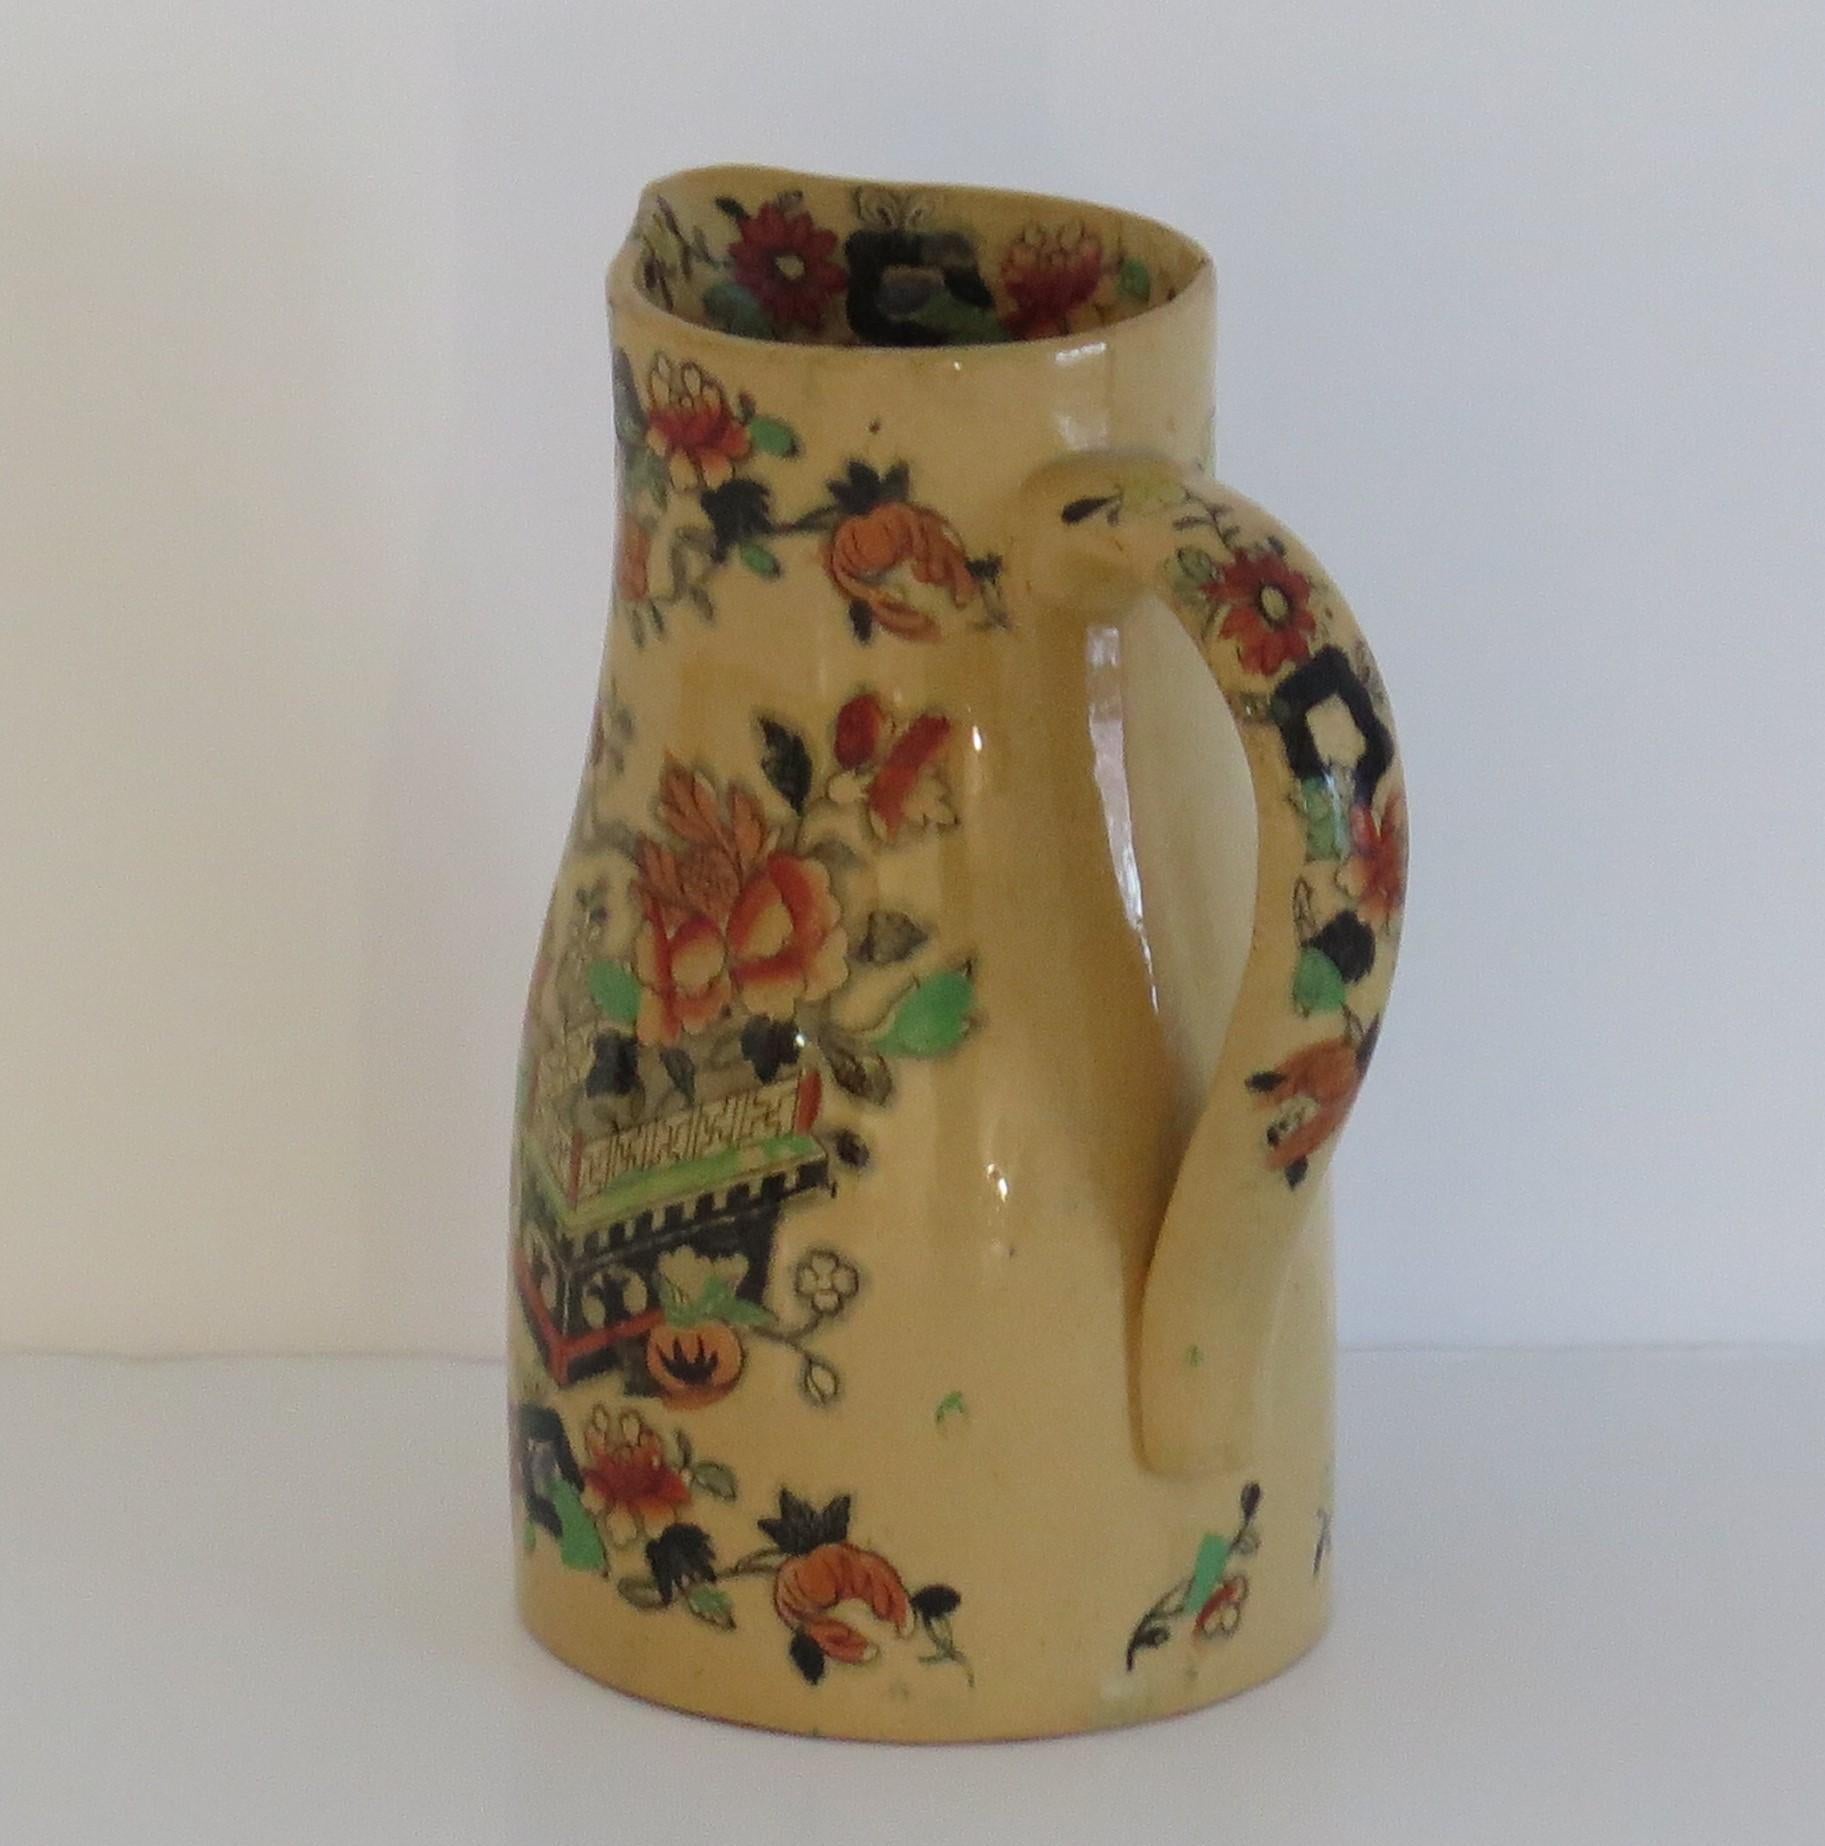 English Mason's Ironstone Jug or Pitcher in Flower Box hand painted Pattern, circa 1840